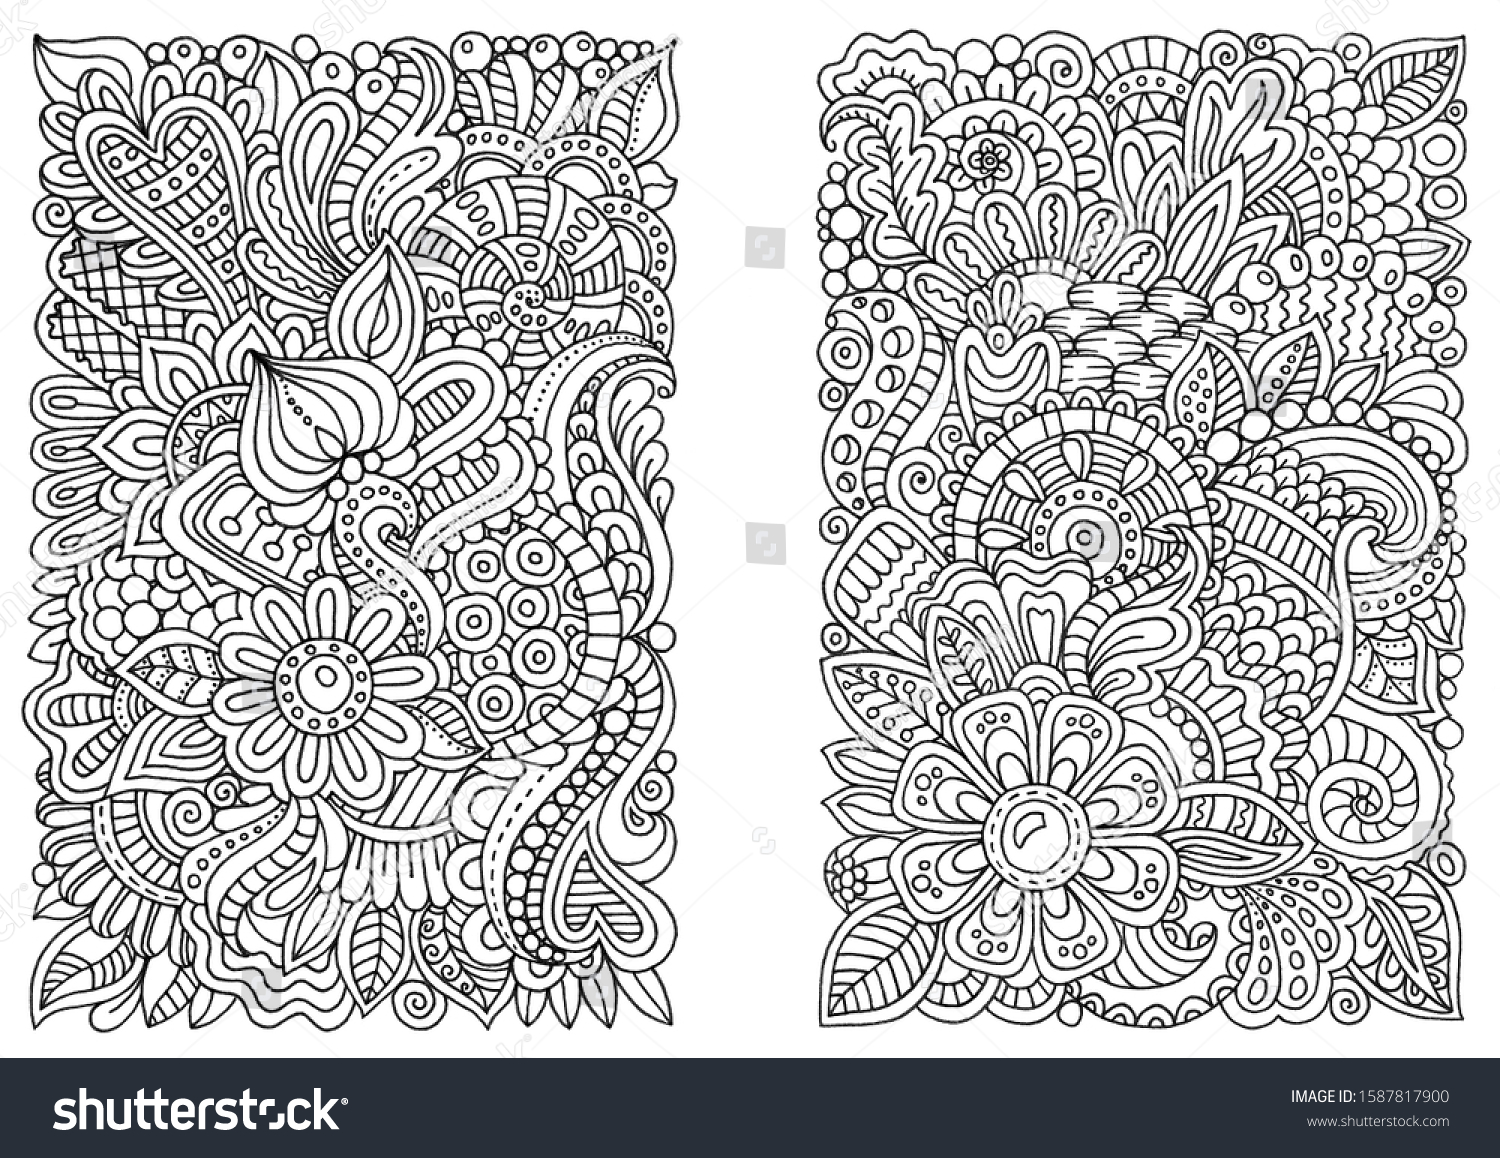 Coloring Book Page Adults Handdraw Doodle Stock Illustration